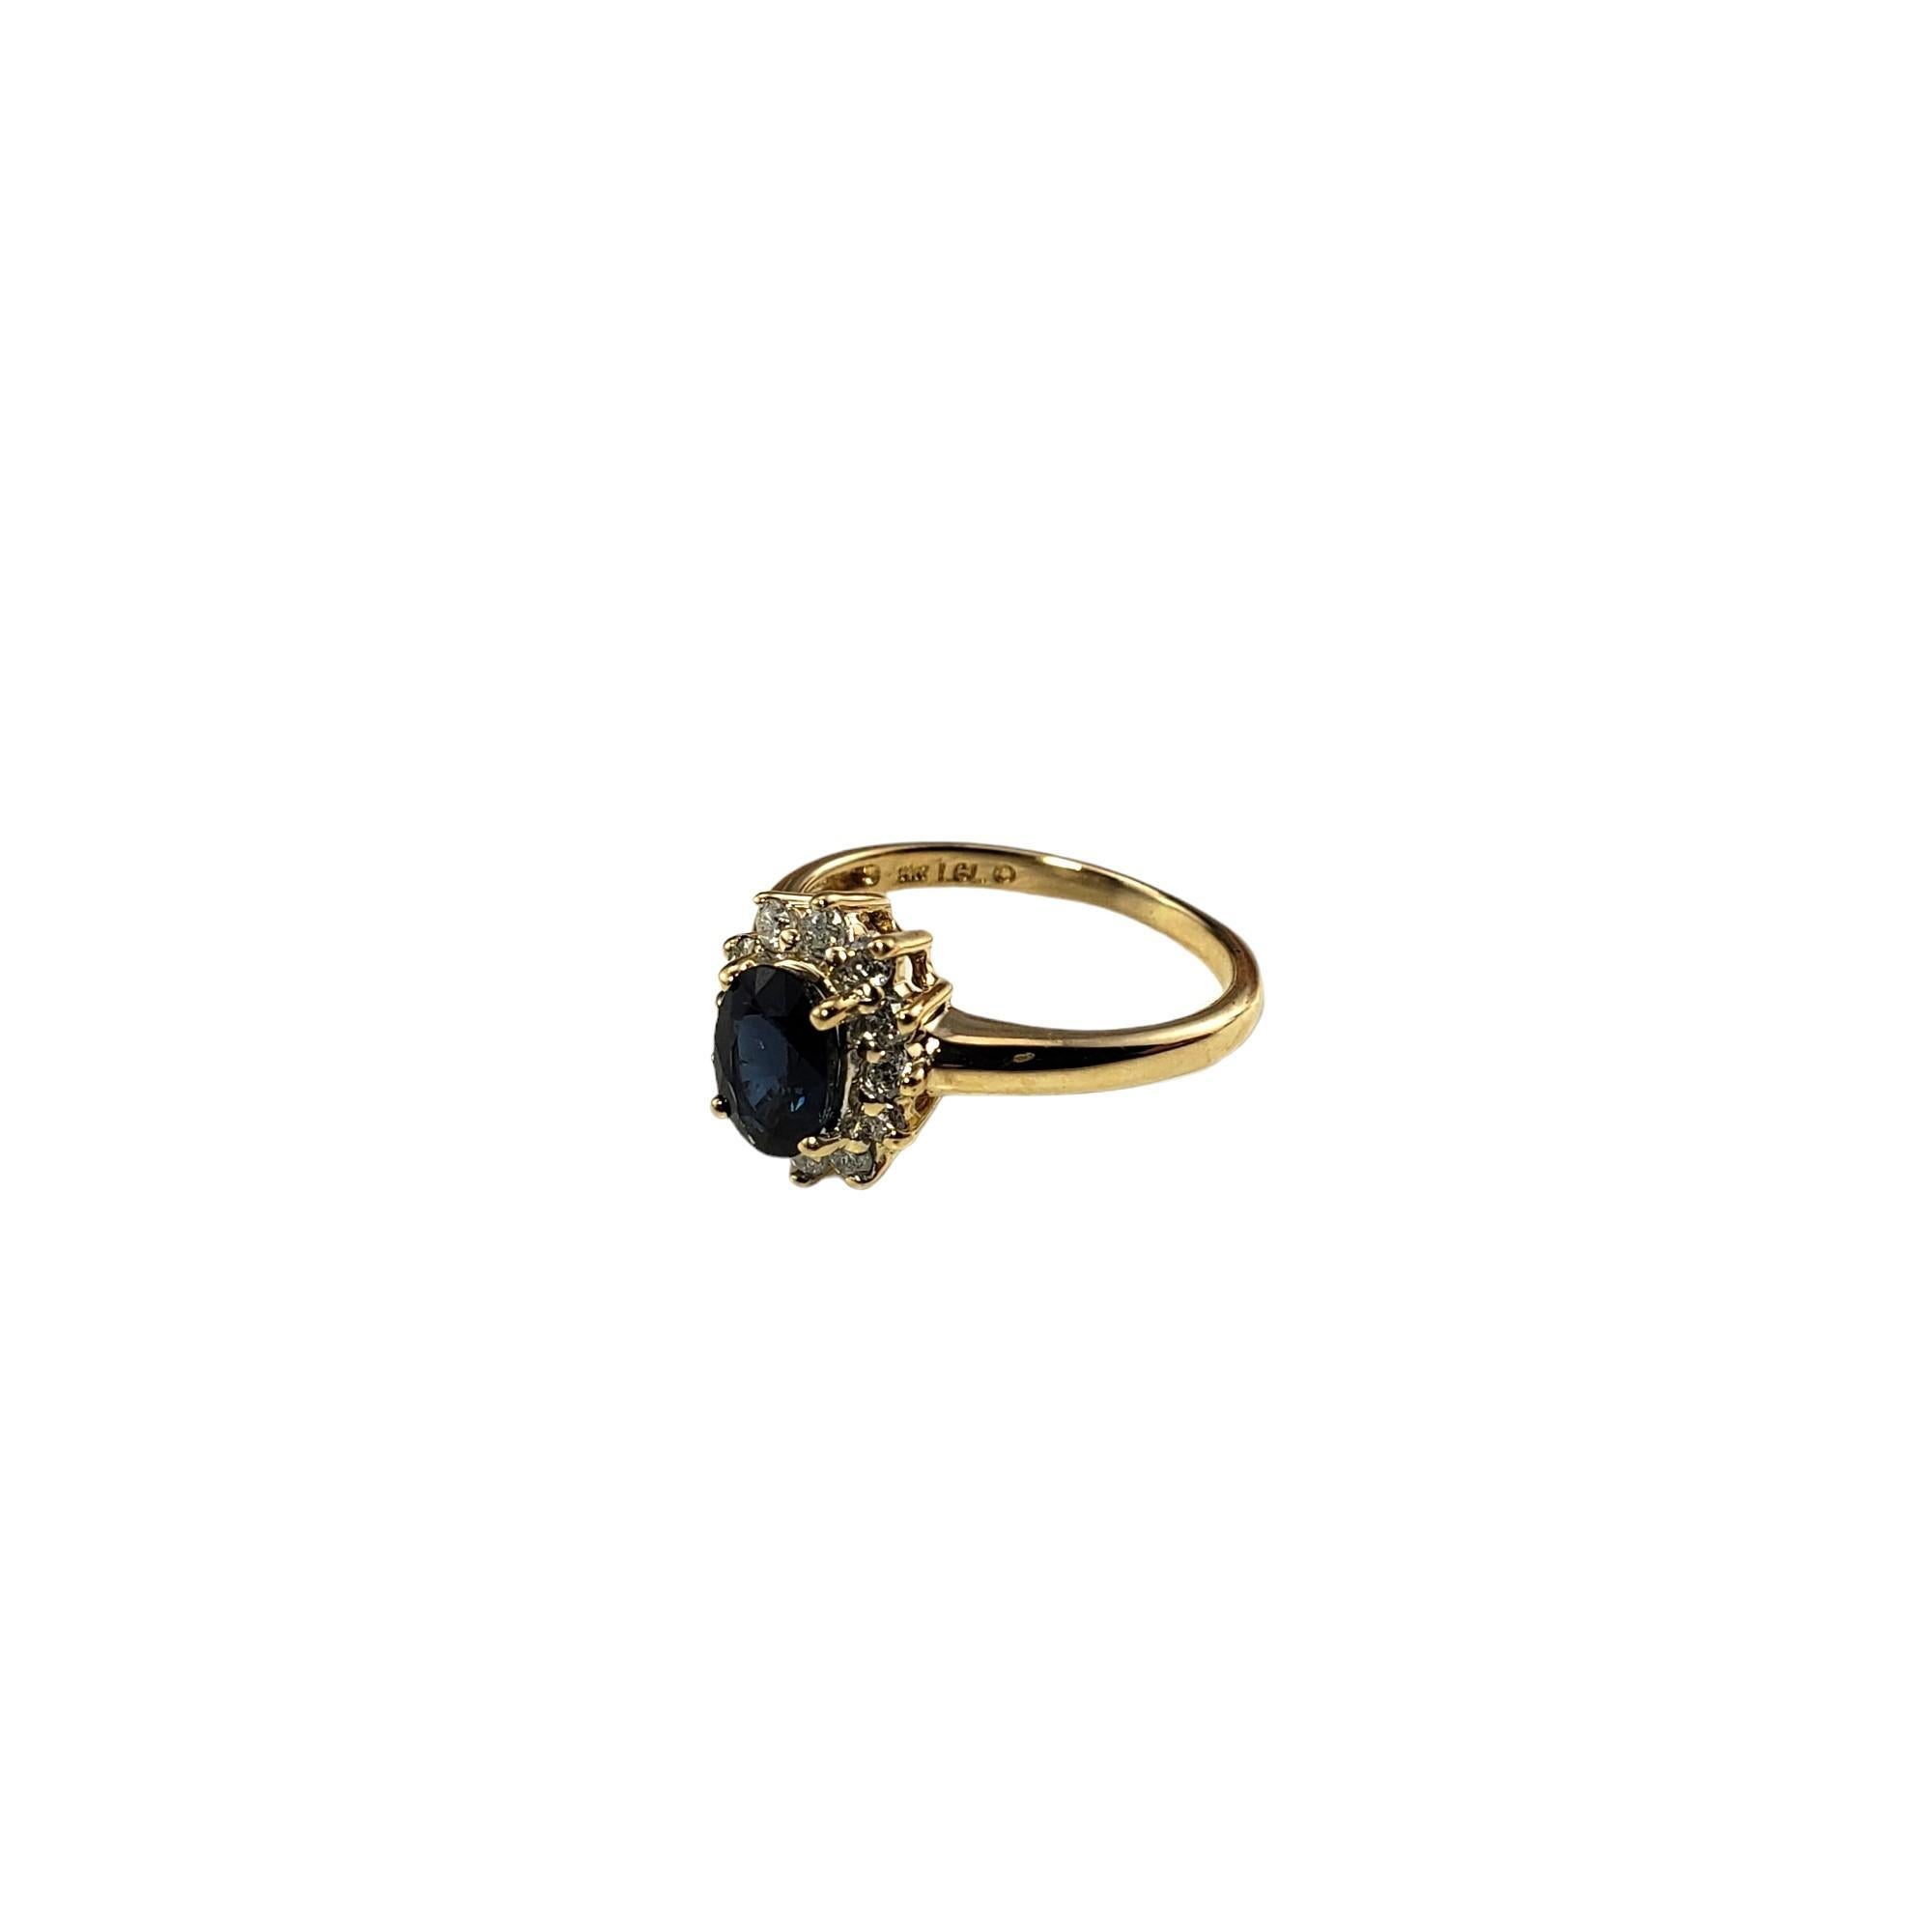 Oval Cut 14K Yellow Gold Sapphire & Diamond Ring Size 5.25 #15745 For Sale